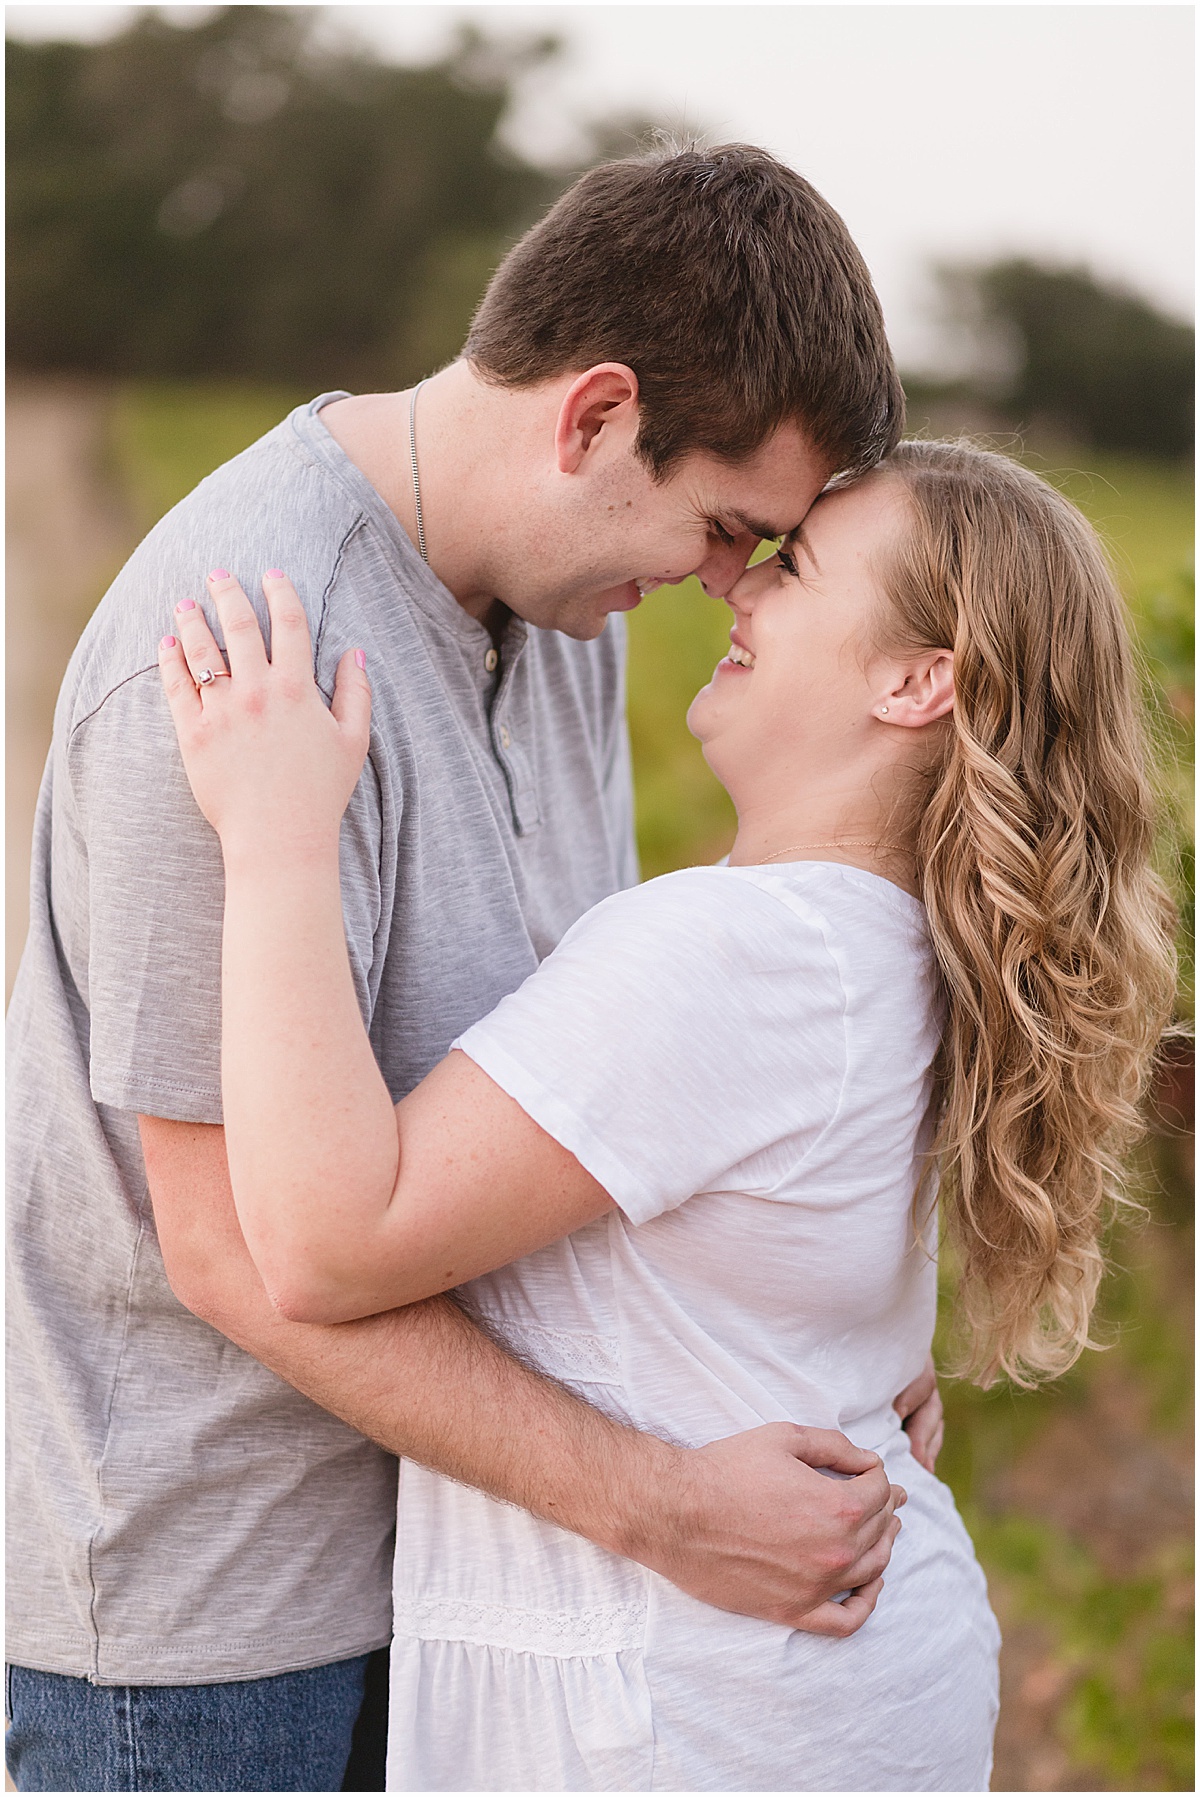 Fortino Winery Engagement Session with Ashley and Stephen in Gilroy, California by Jen Vazquez Photography